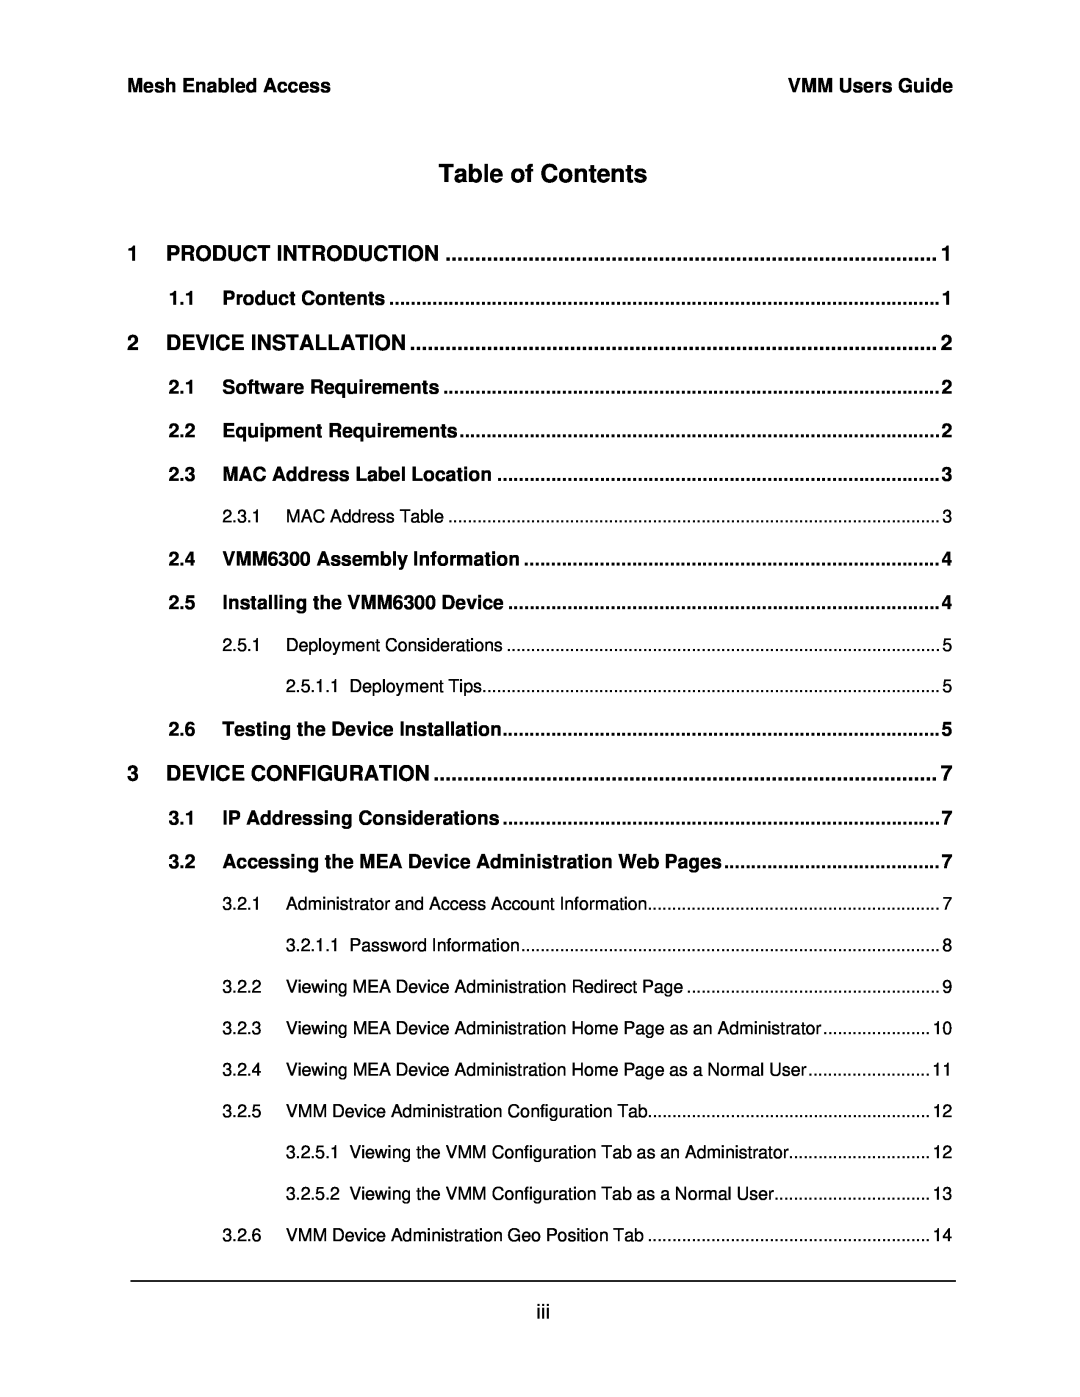 Motorola 3.1 Table of Contents, Product Introduction, Device Installation, Device Configuration, Equipment Requirements 